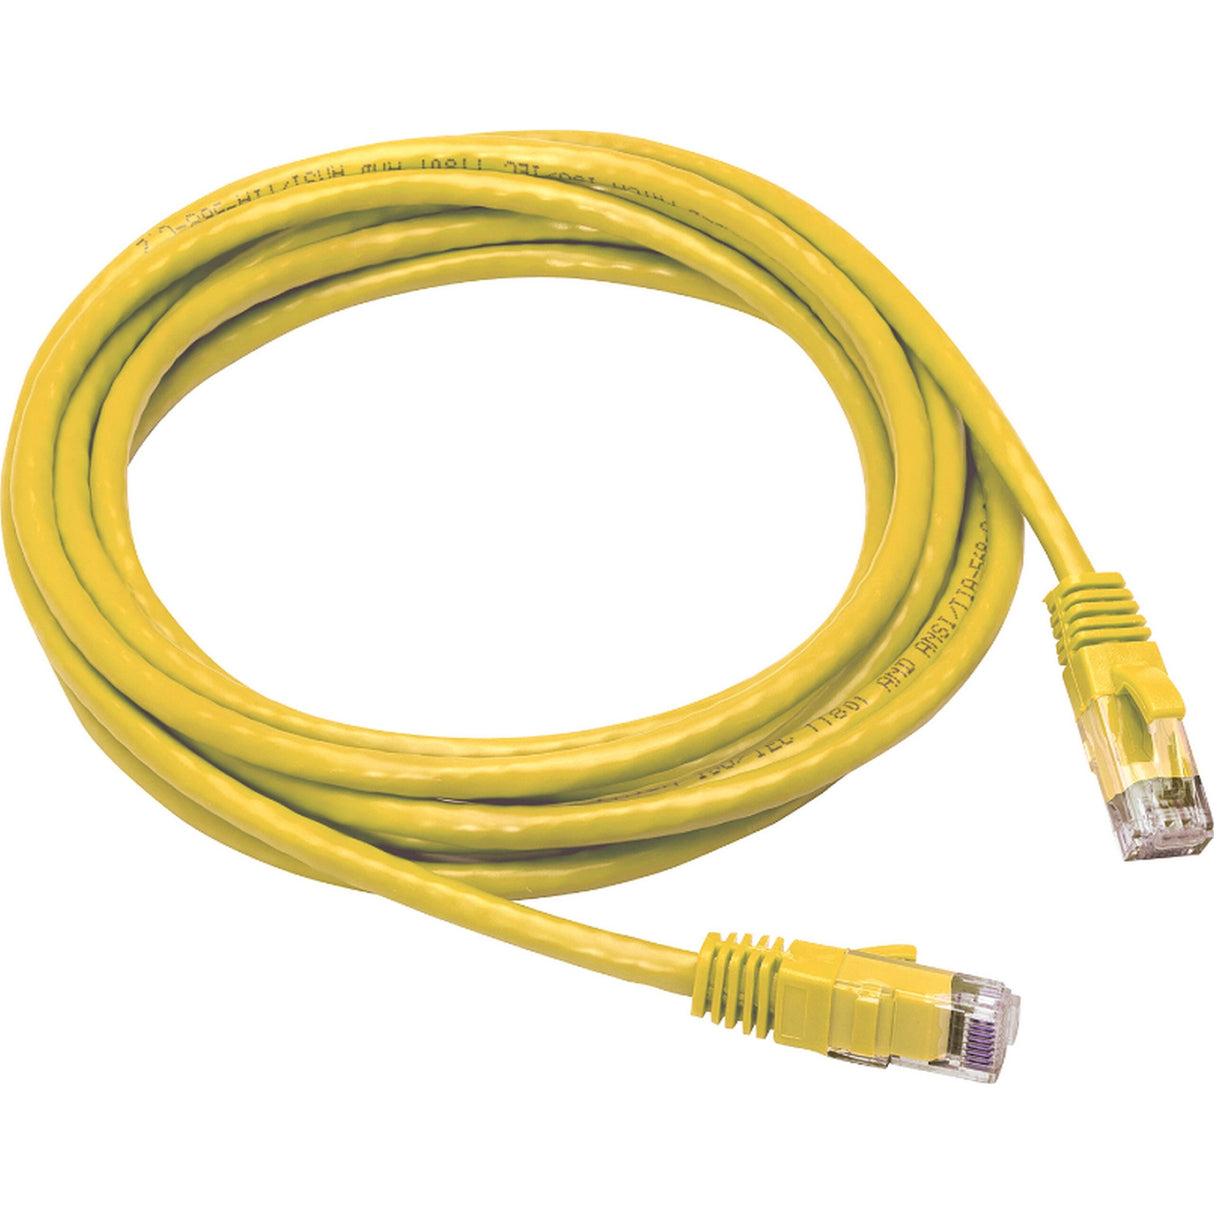 Liberty AV 152G5U4001 Category 5E True 24AWG Patch Cable, 1 Foot, Yellow